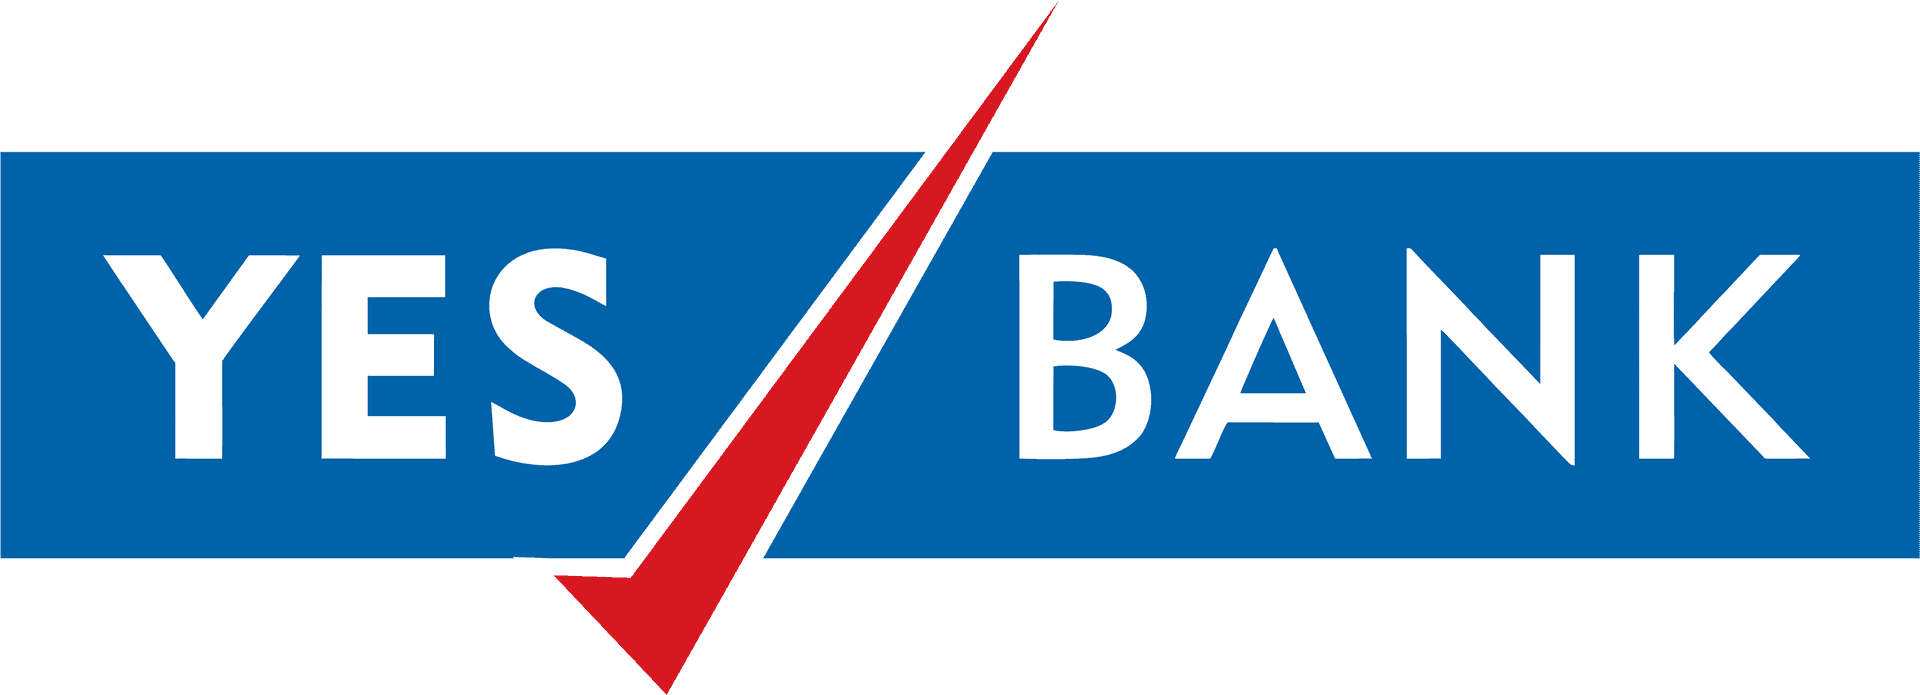 Yes Bank Logowith Red Arrow PNG image